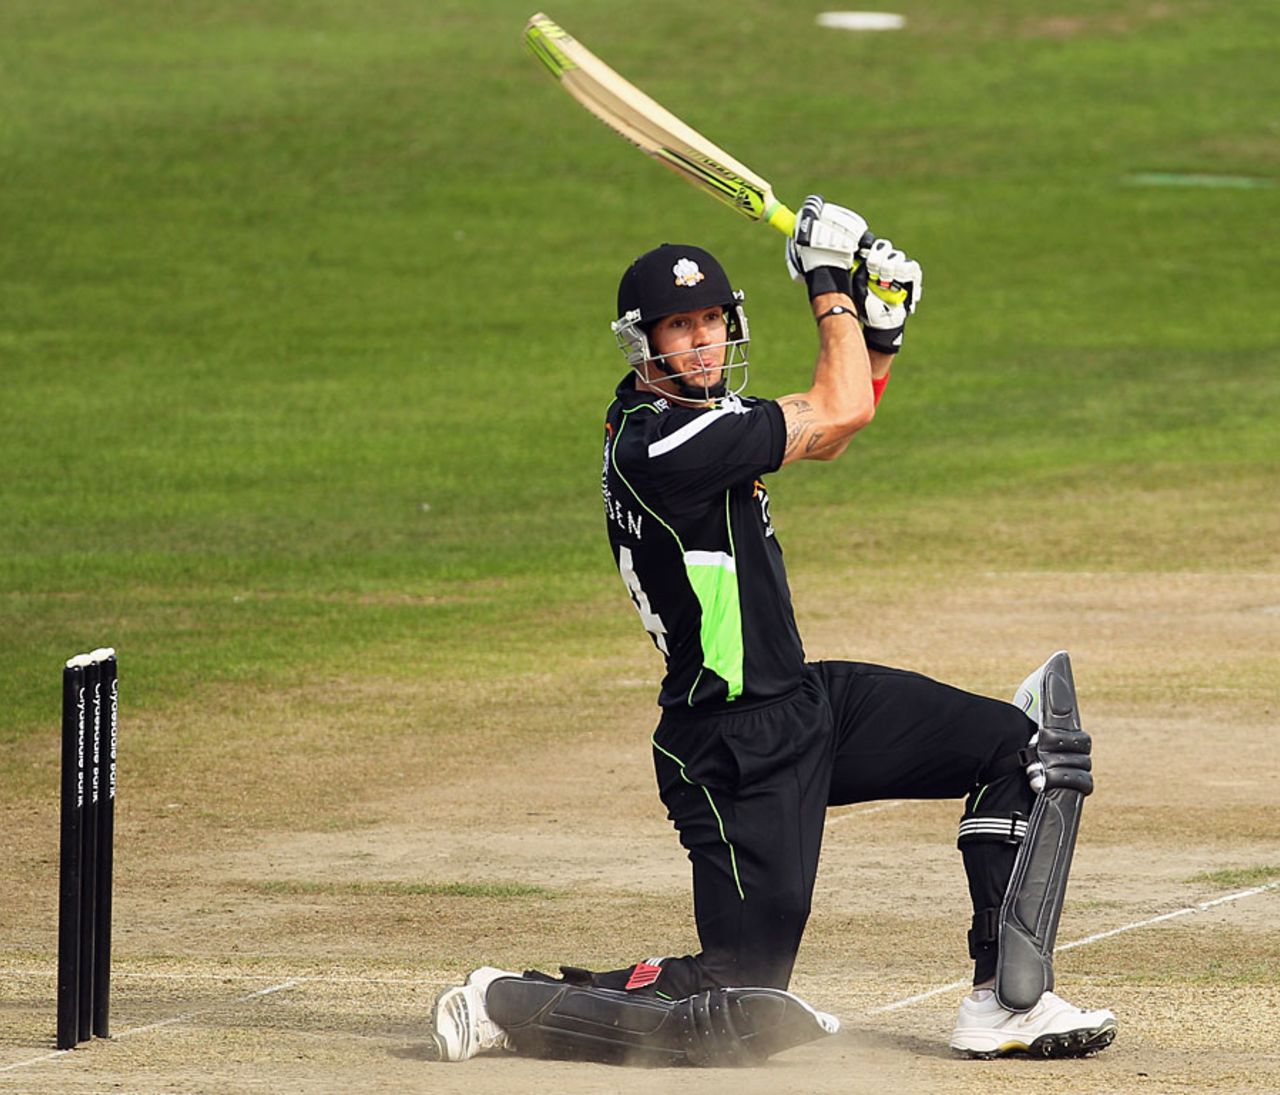 Kevin Pietersen cracked his first century in 18 months as Surrey tied with Sussex, Sussex v Surrey, Clydesdale Bank 40, Hove, September 5, 2010